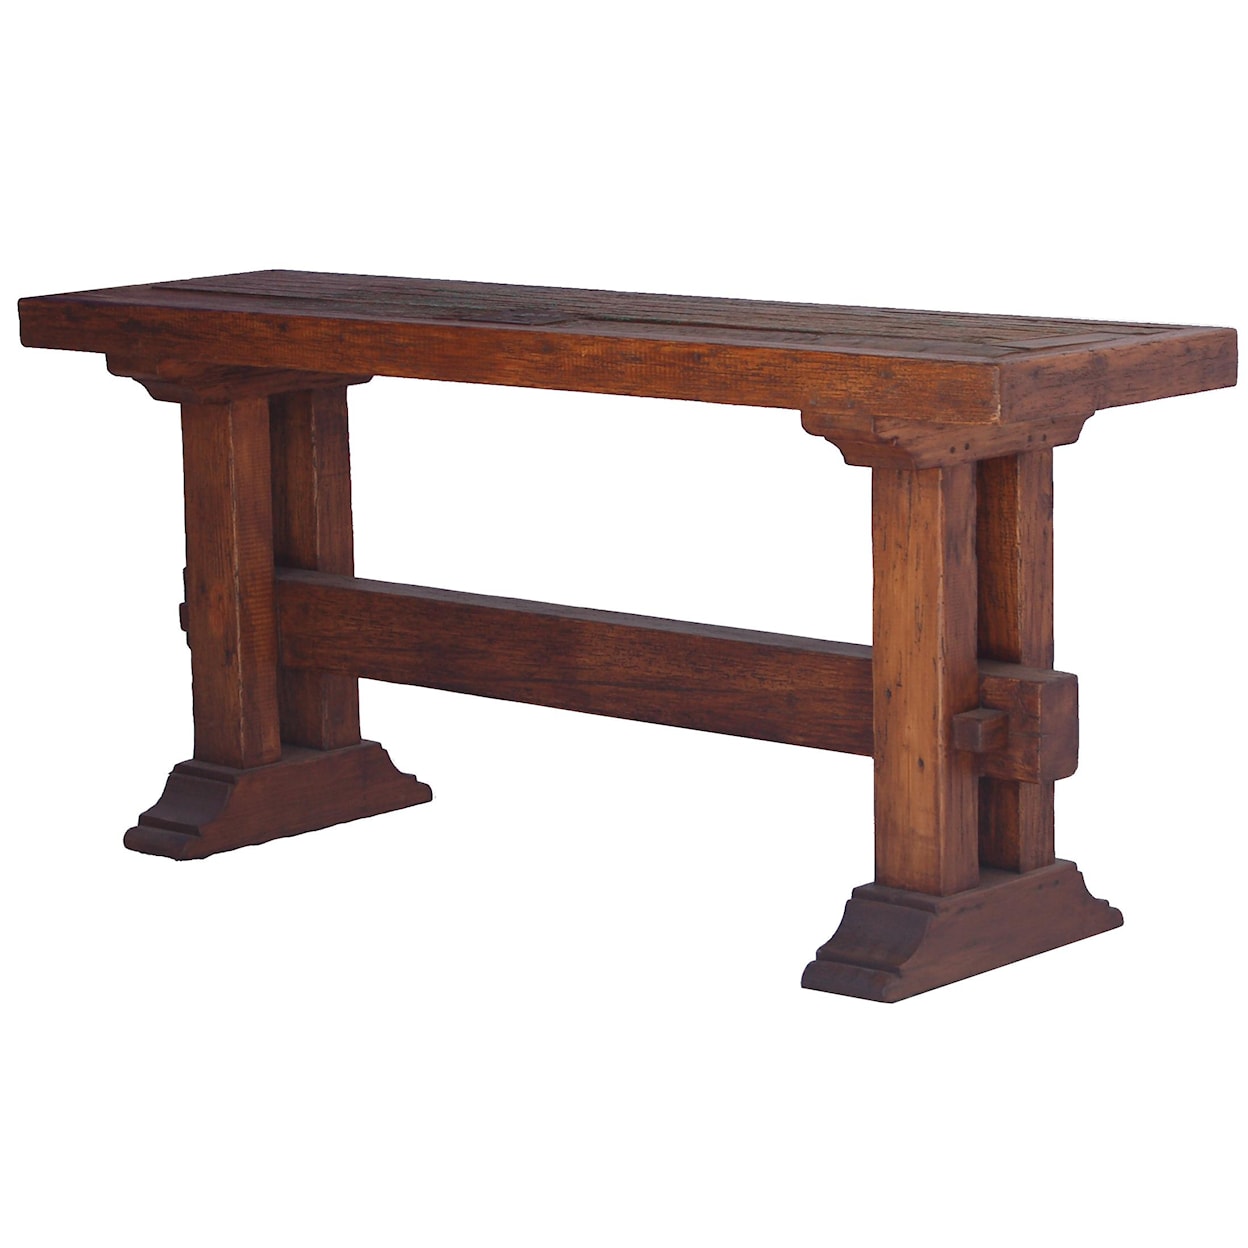 Furniture Source International Occasional Tables Trestle Console